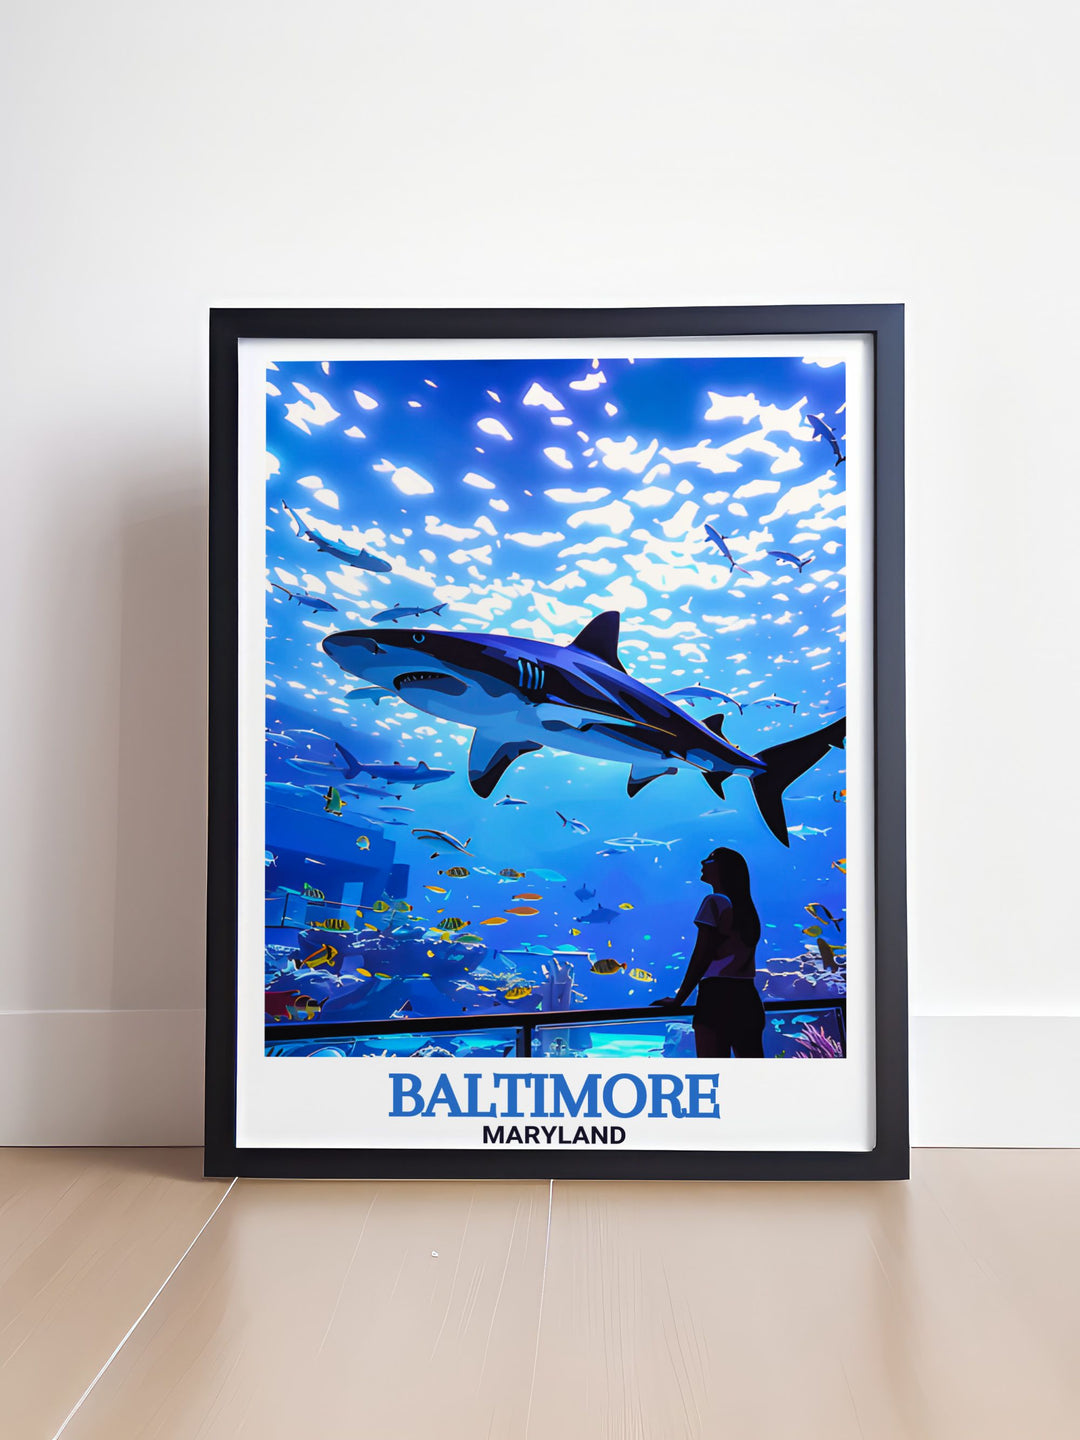 Sophisticated National Aquarium home decor piece displaying a detailed street map of Baltimore this matted art print offers a stylish and meaningful addition to any wall perfect for those who love urban landscapes and city maps